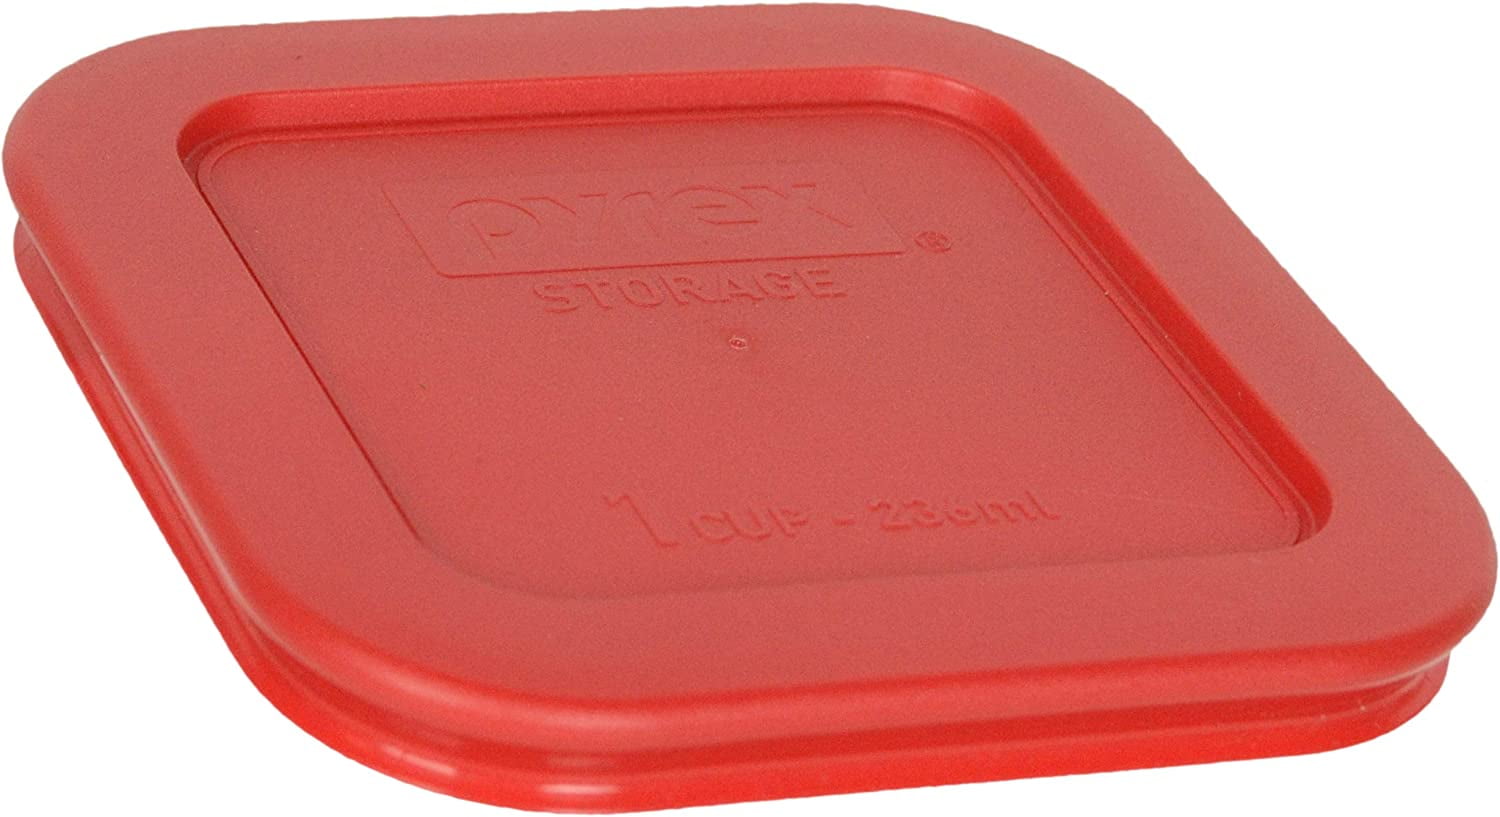 Total Solution® Pyrex® Glass 1-cup Square Food Storage with Plastic Lid